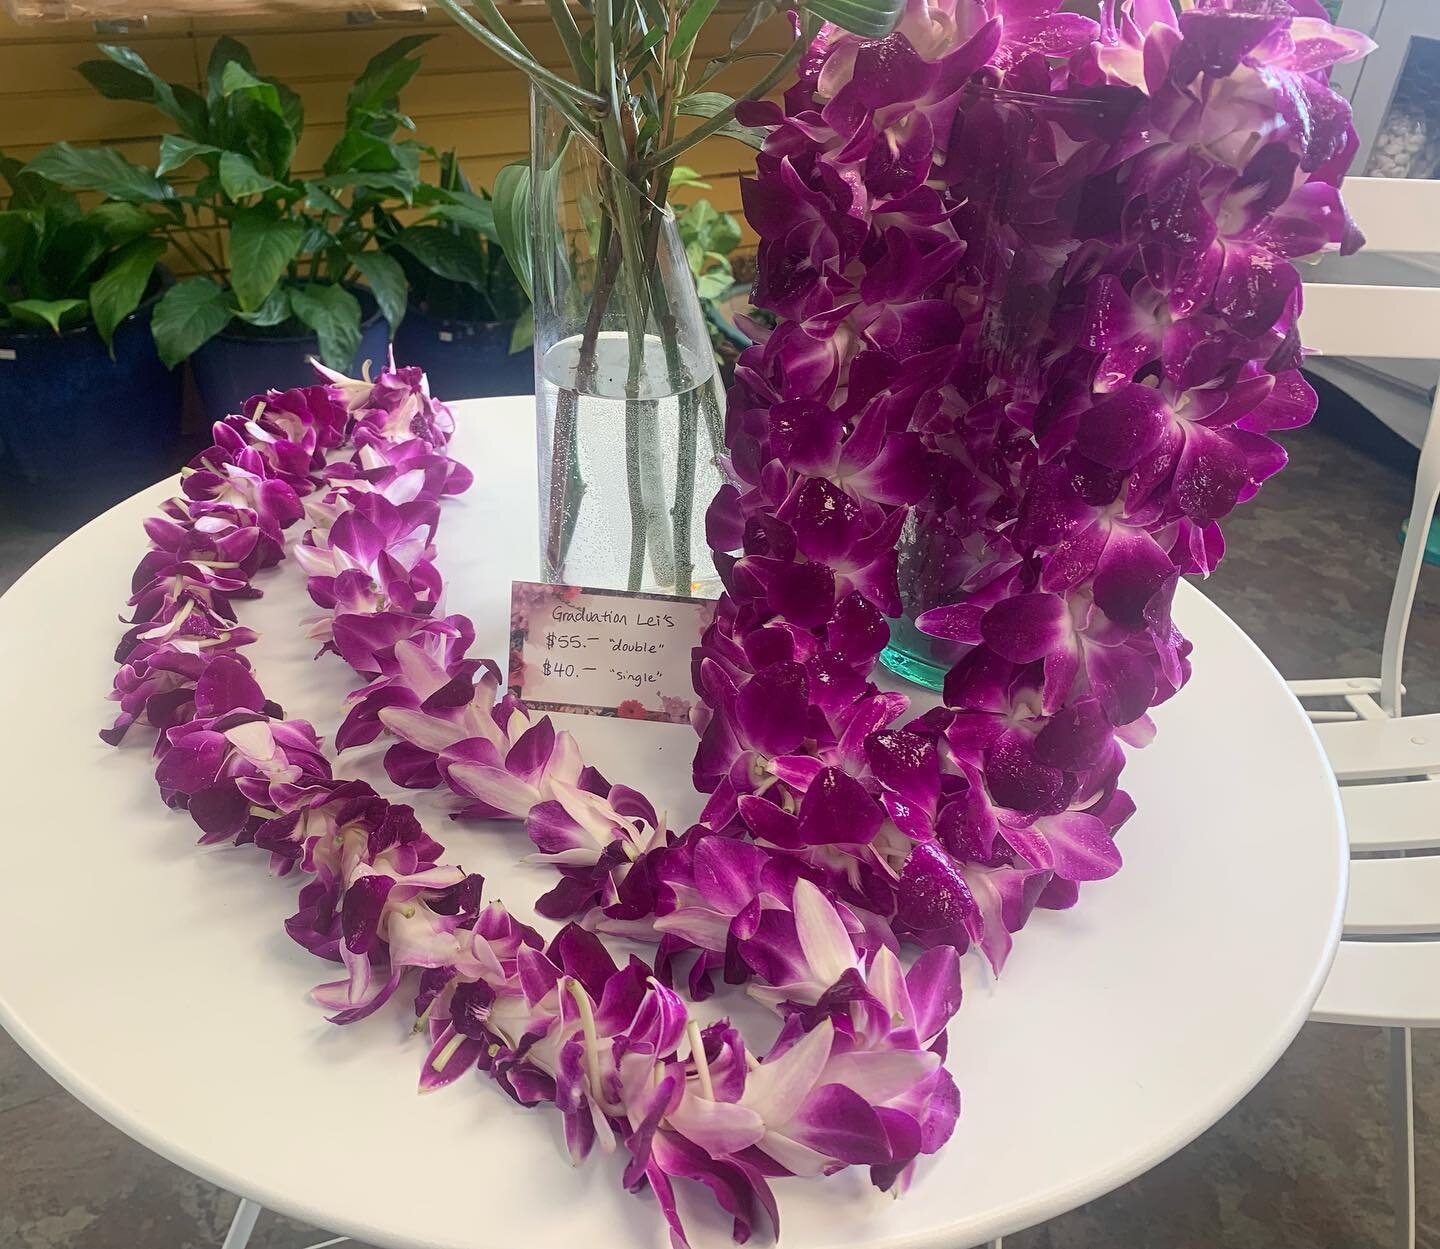 We&rsquo;ve got a handful of purple leis still available for graduation Monday! Give us a call to reserve yours.
Singles-$40
Doubles-$55